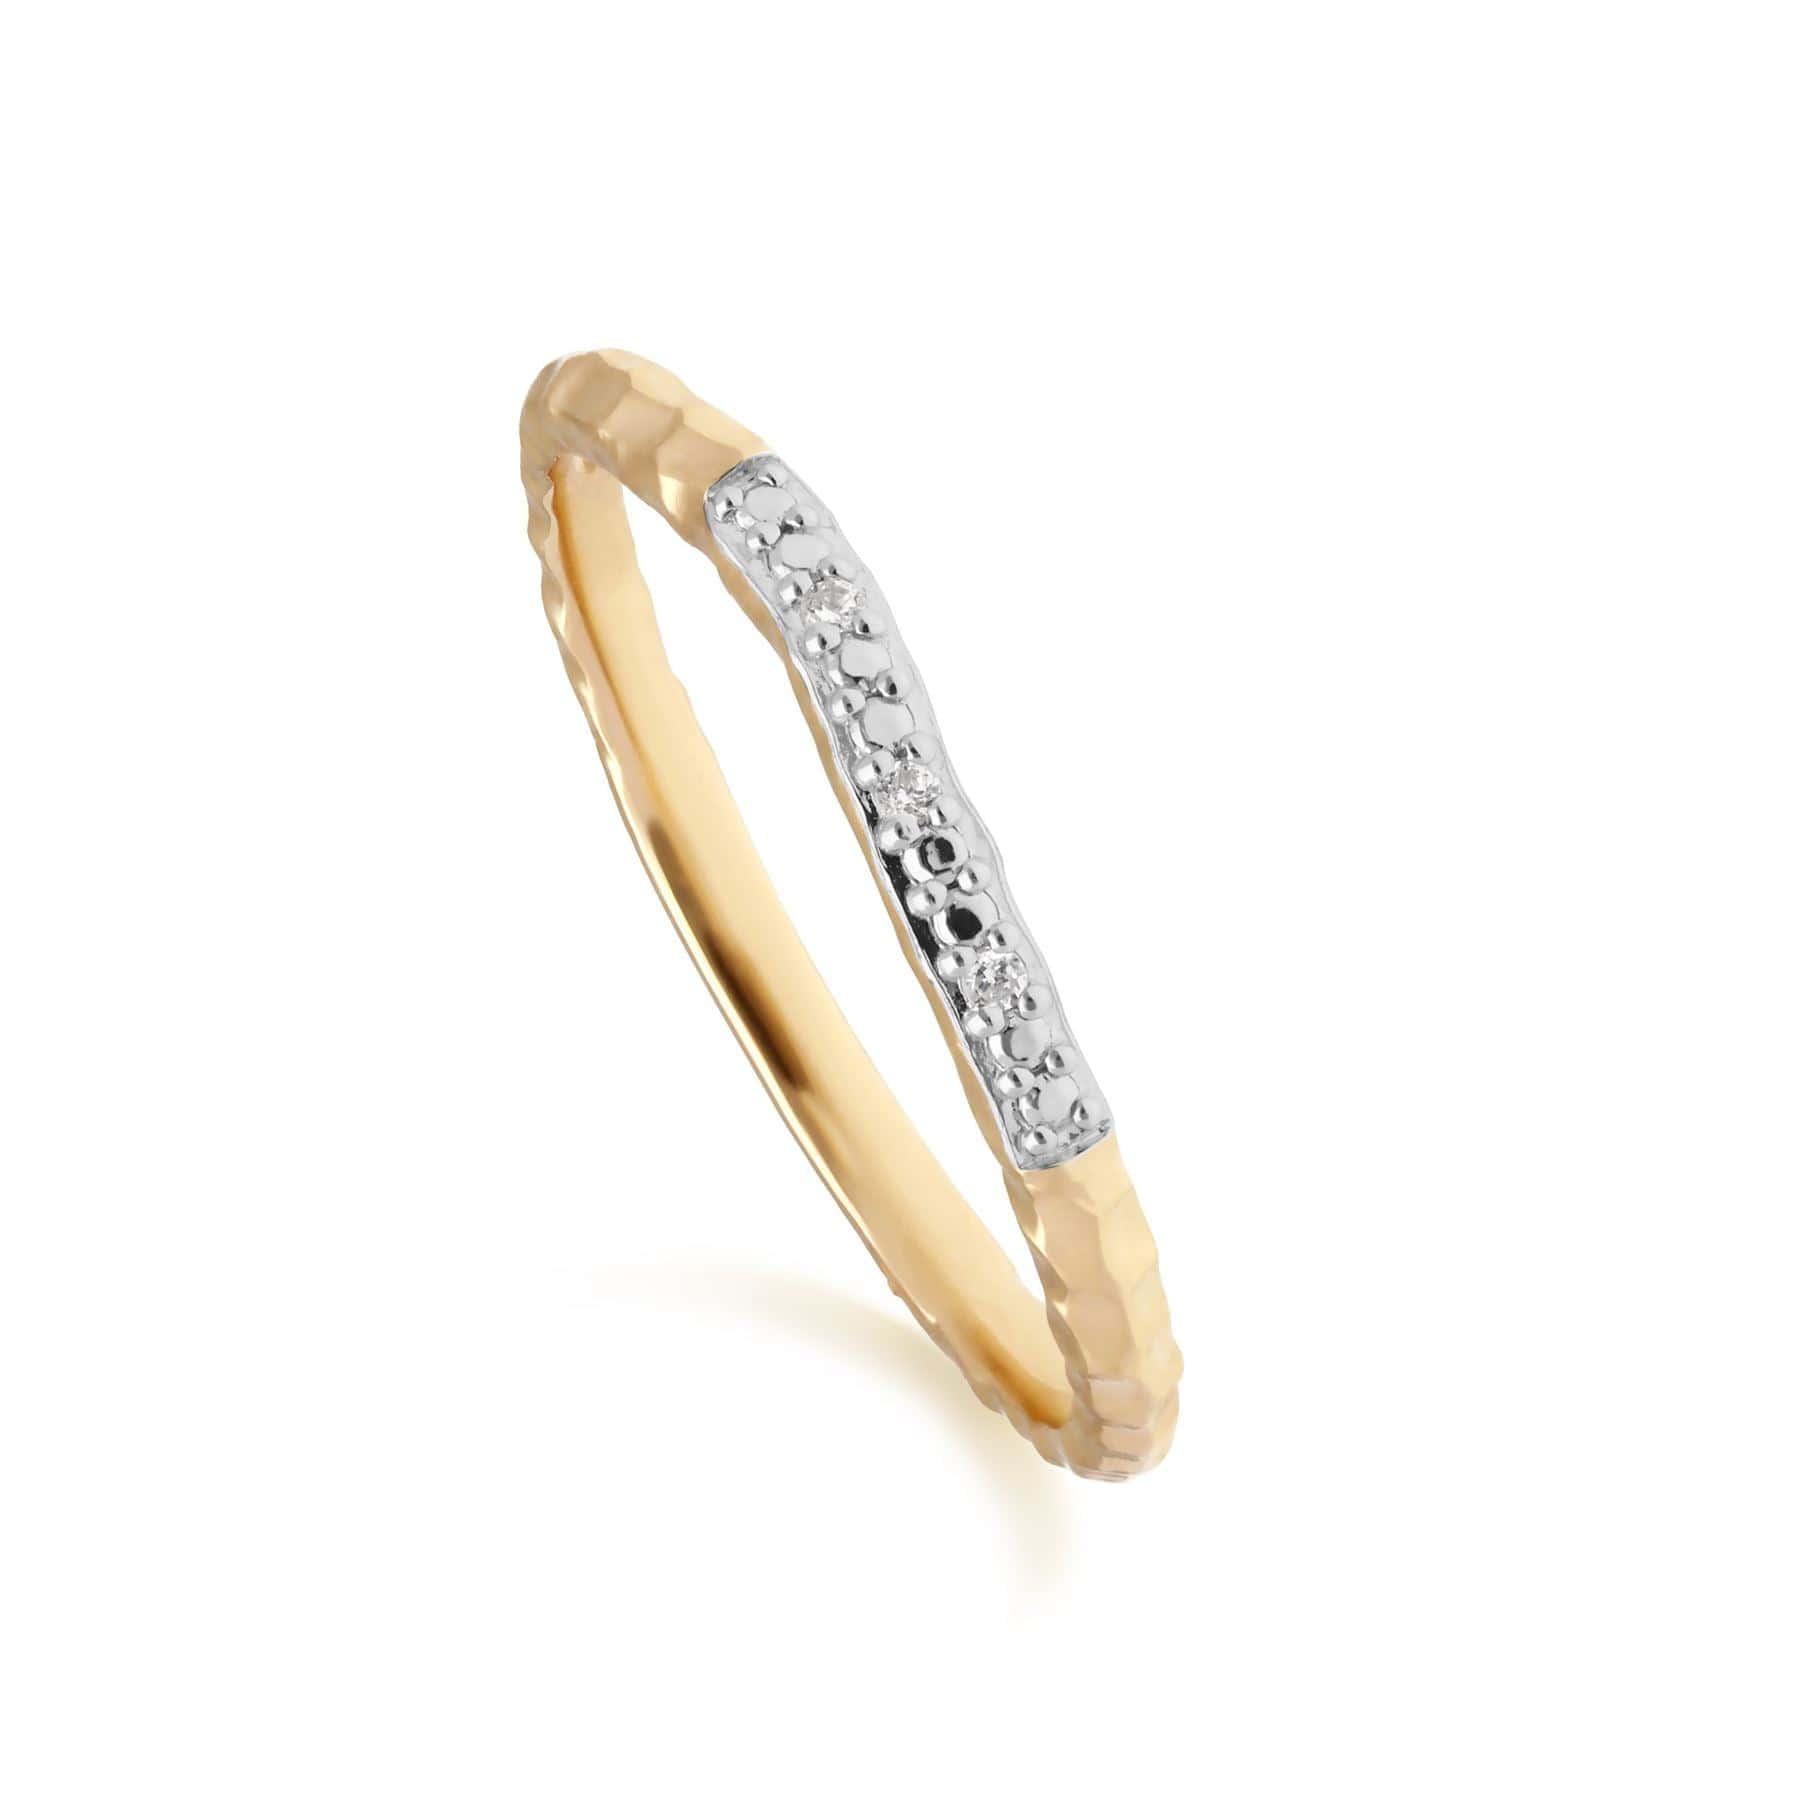 191R0910019 Diamond Pave Hammered Band Ring in 9ct Yellow Gold 1